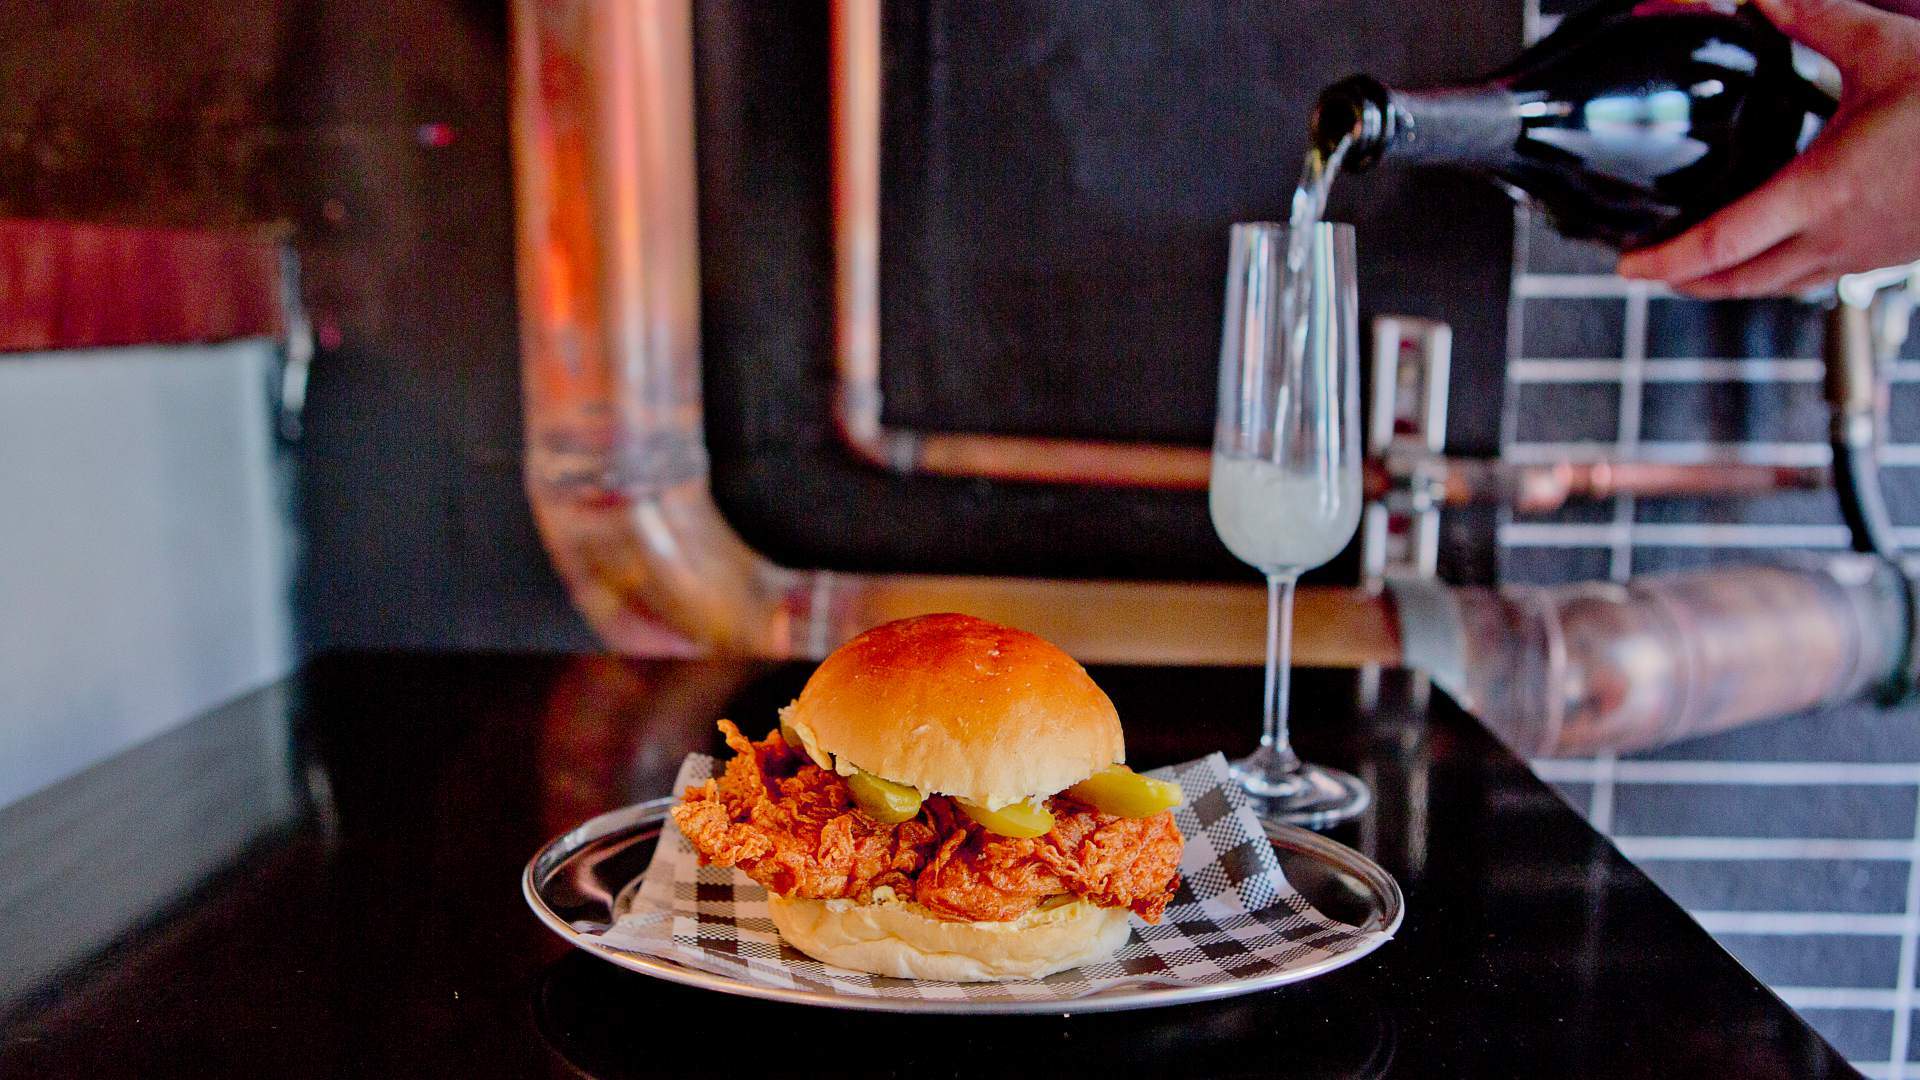 chicken burger and a glass of champagne at Butter - home to some of the best burgers in sydney